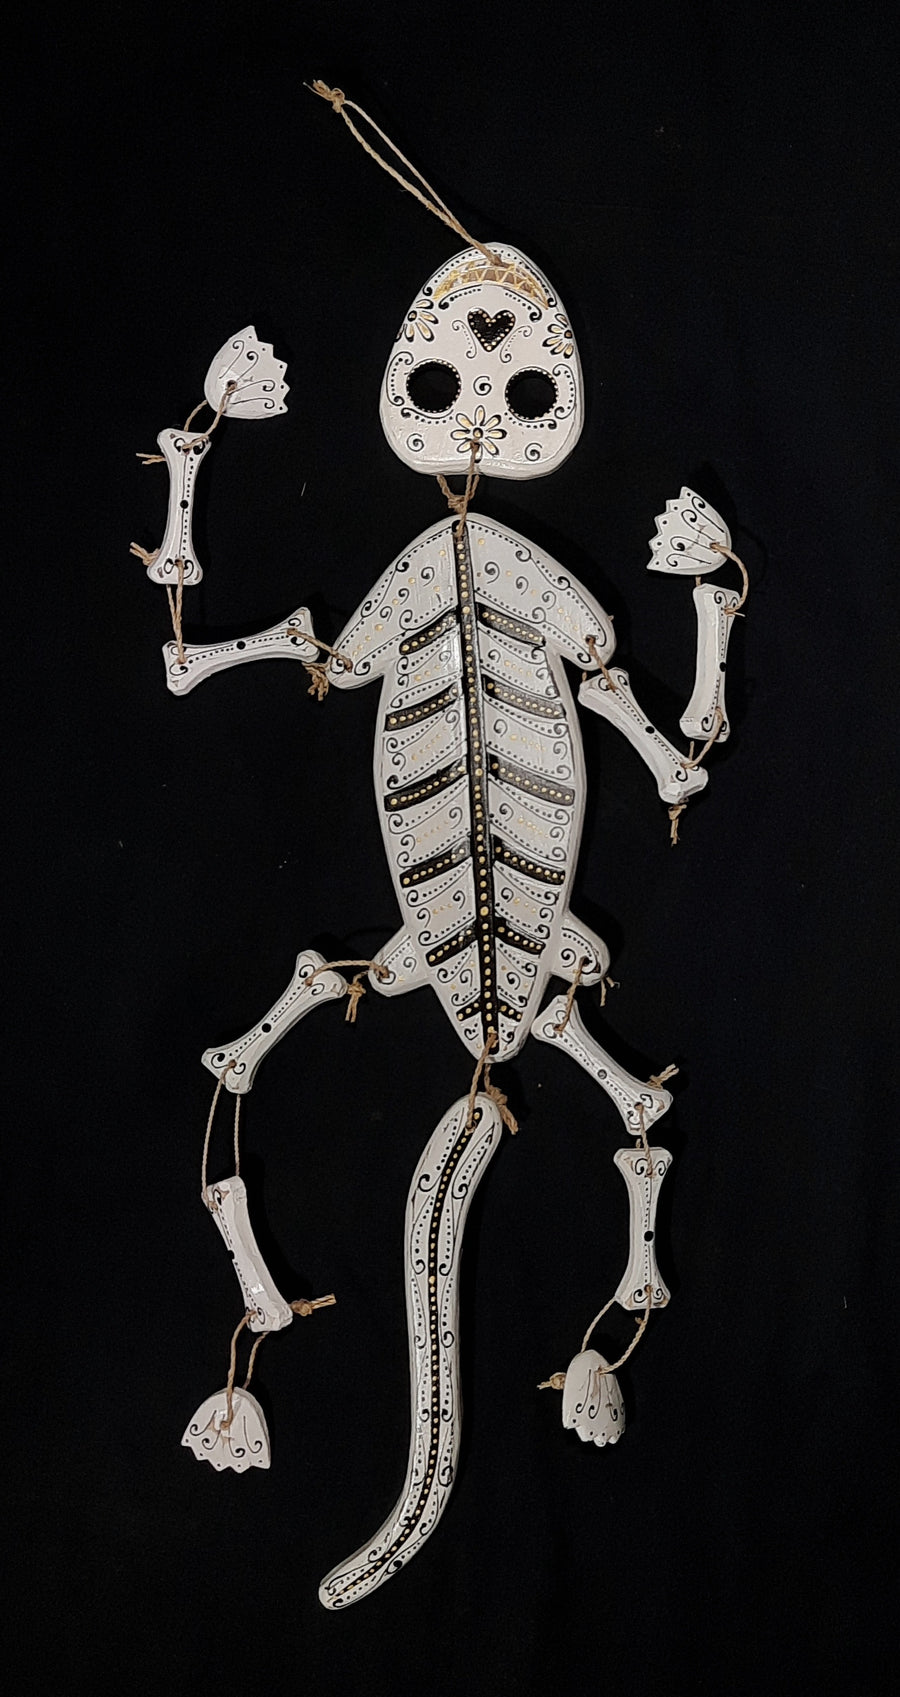 A white lizard skeleton calavera spirit medicine rattle with gold and black lying on a black background 